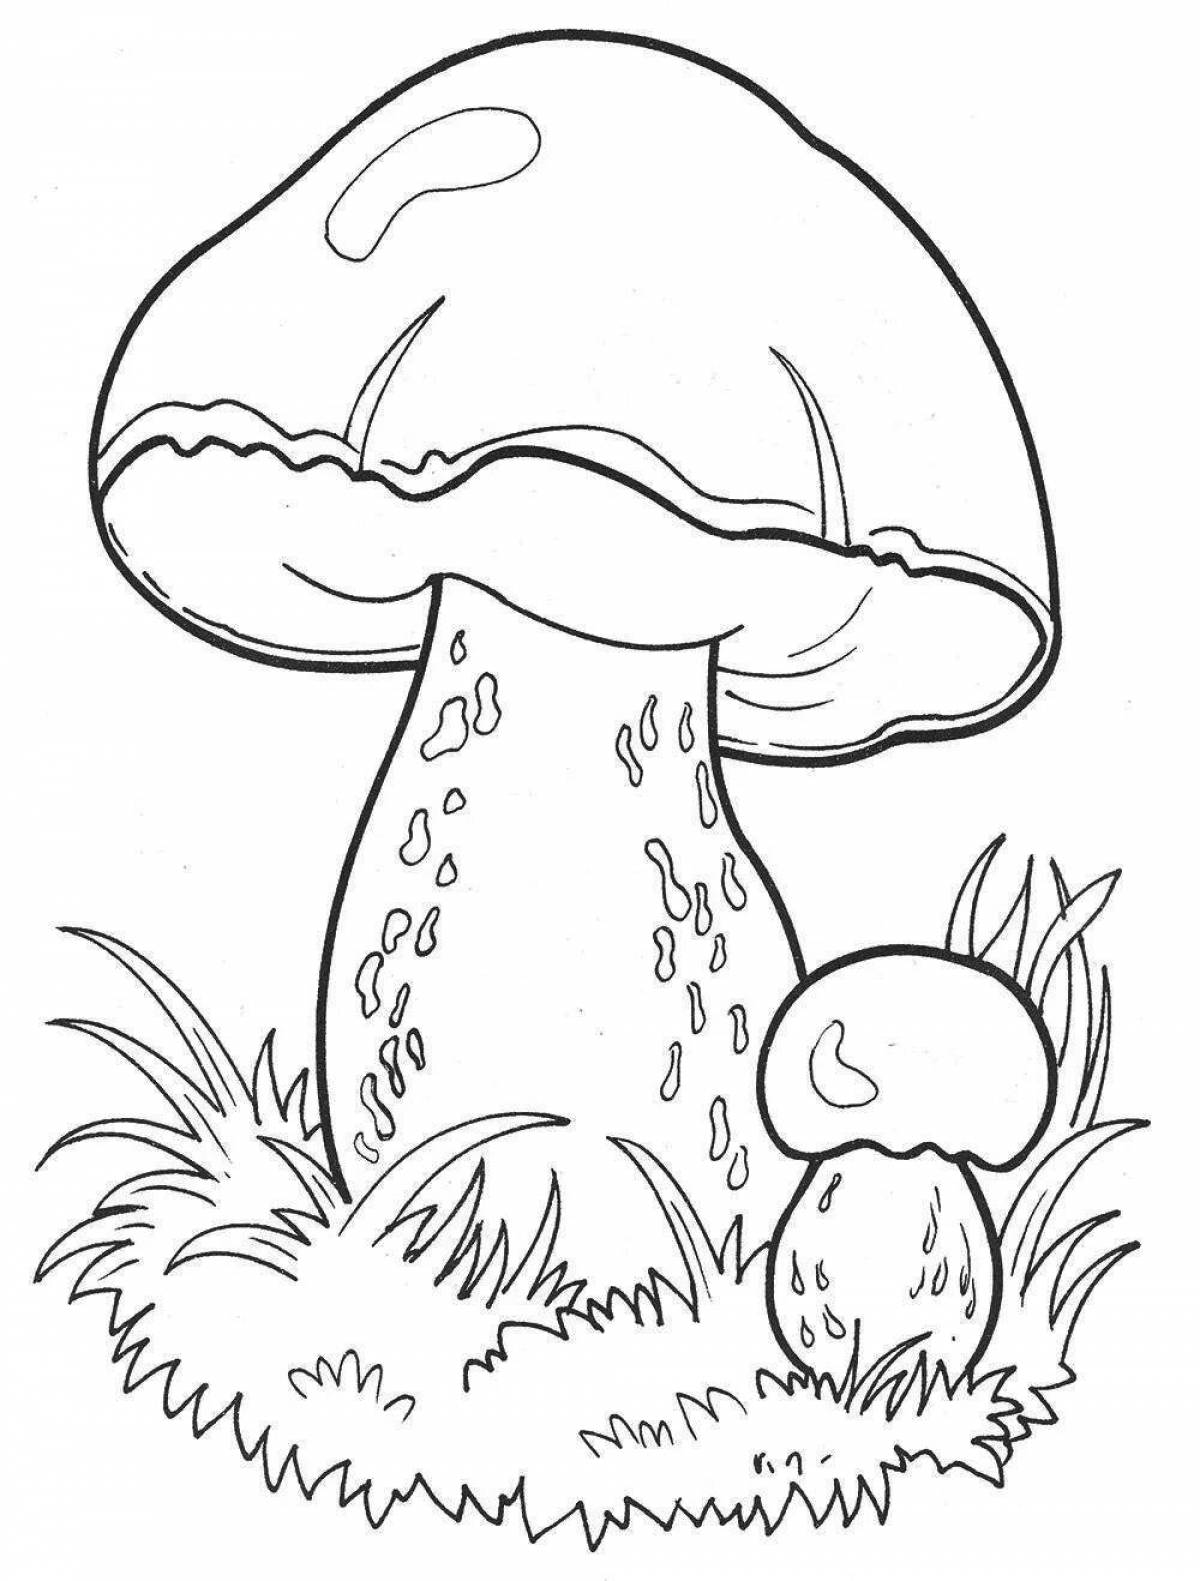 Coloring inspiration with porcini mushrooms